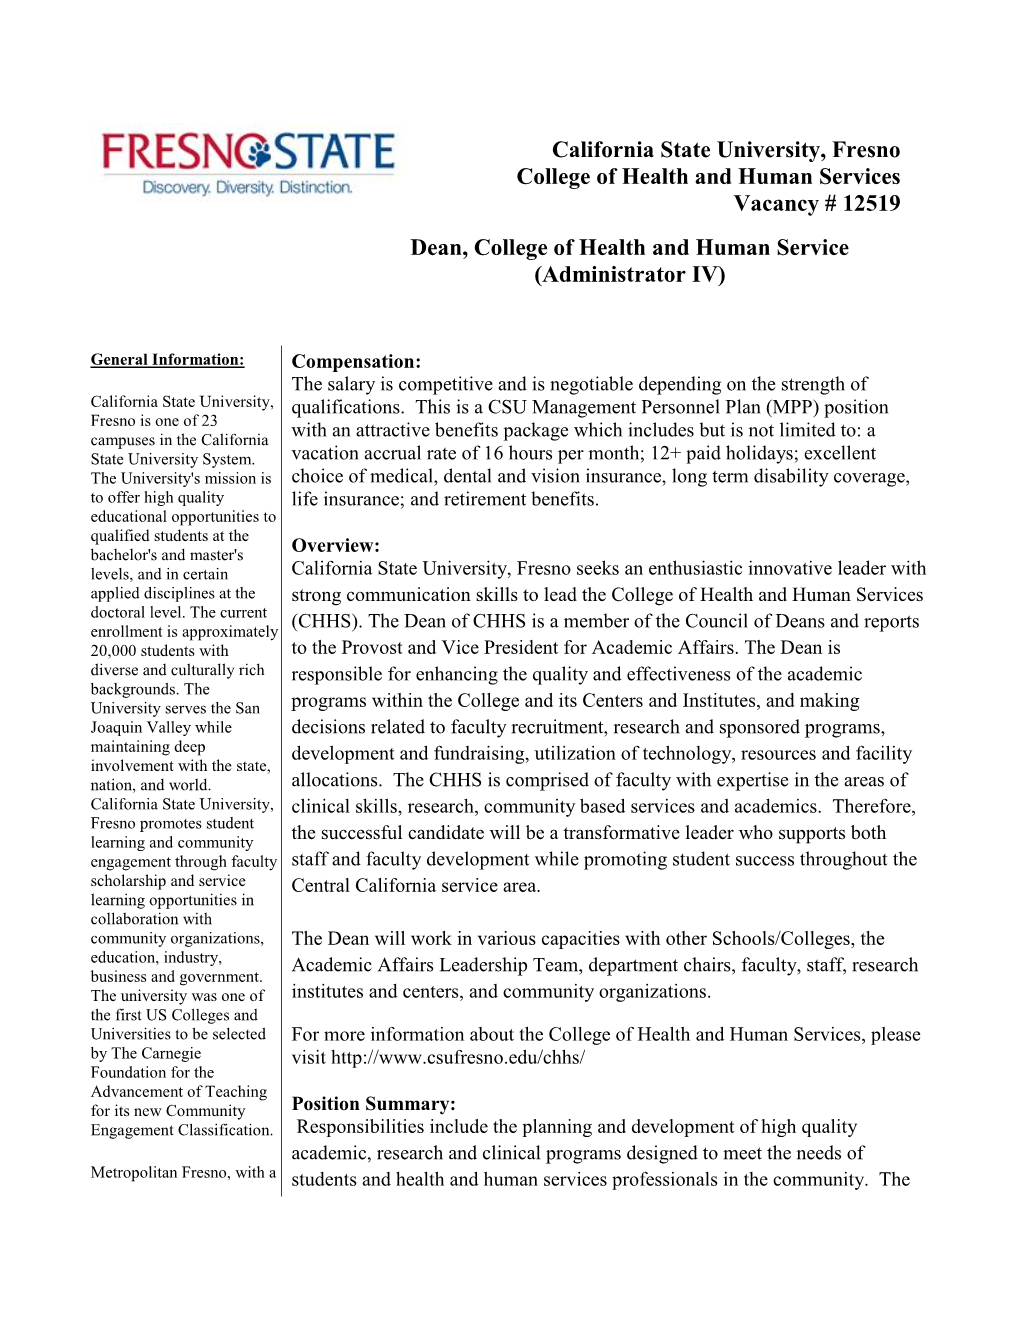 California State University, Fresno College of Health and Human Services Vacancy # 12519 Dean, College of Health and Human Service (Administrator IV)